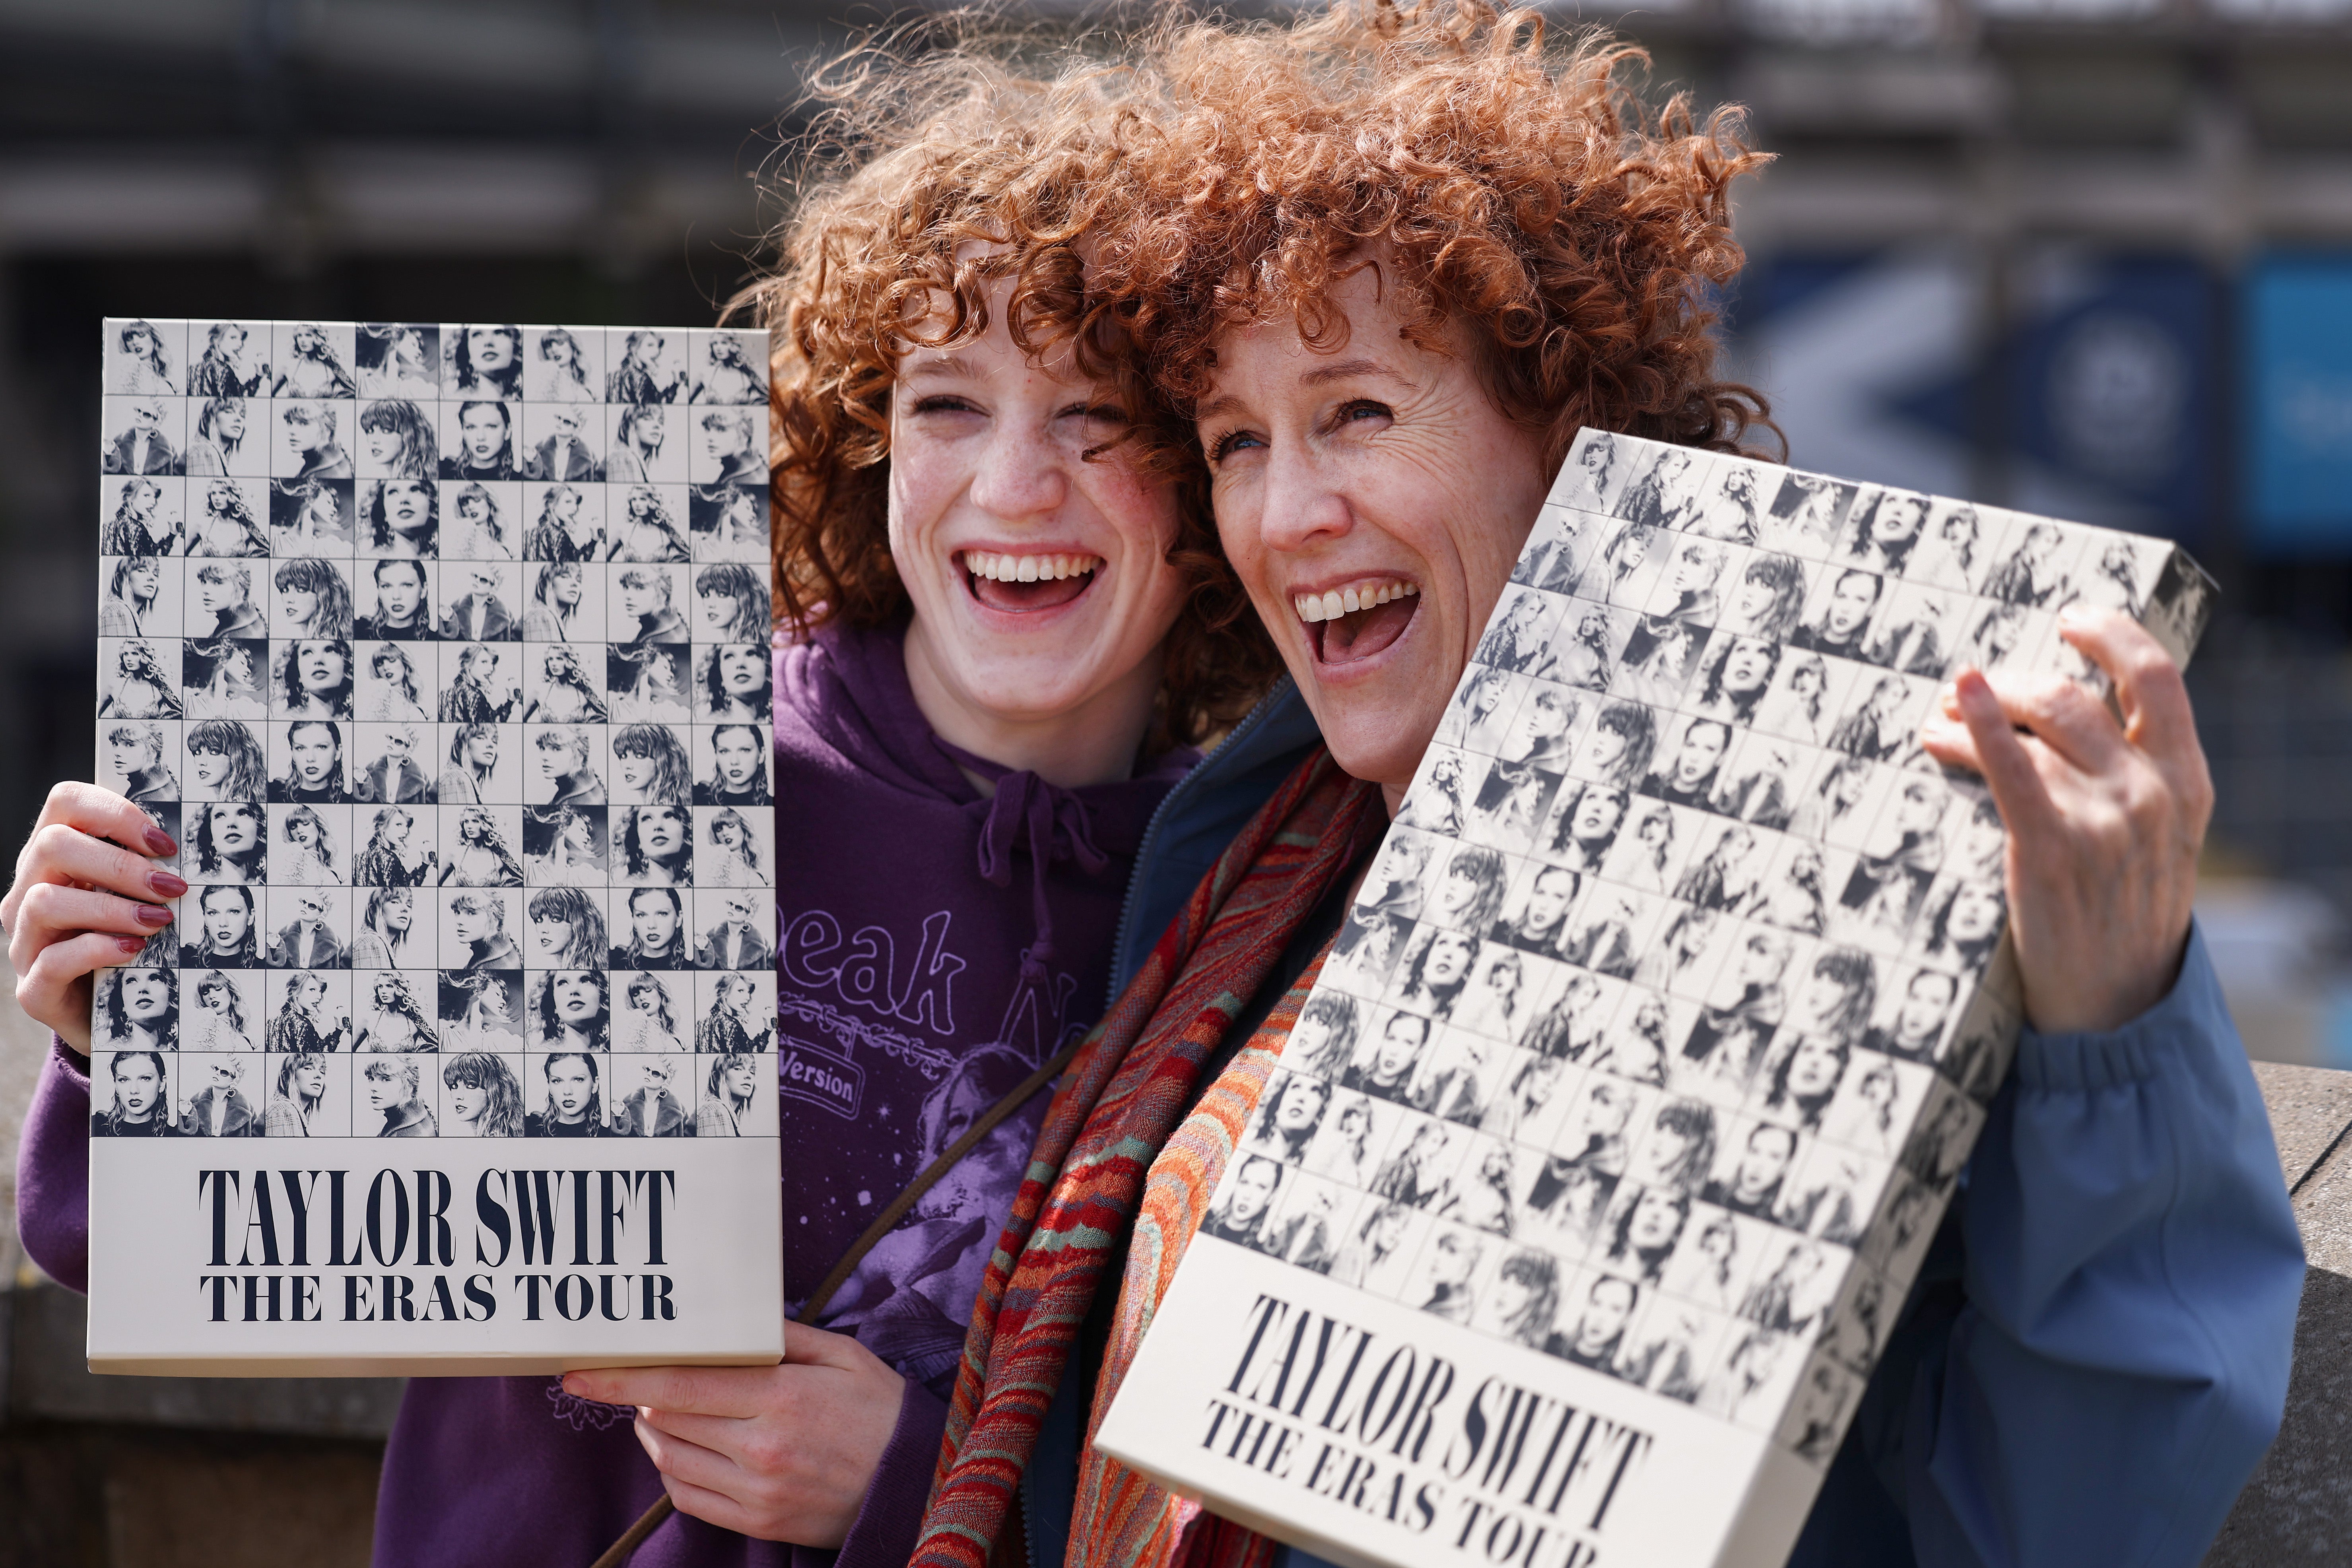 Taylor Swift fans pose with merch as they queue outside Murrayfield Stadium in Edinburgh, Scotland, the day before the pop star headlines the first of her UK Eras shows